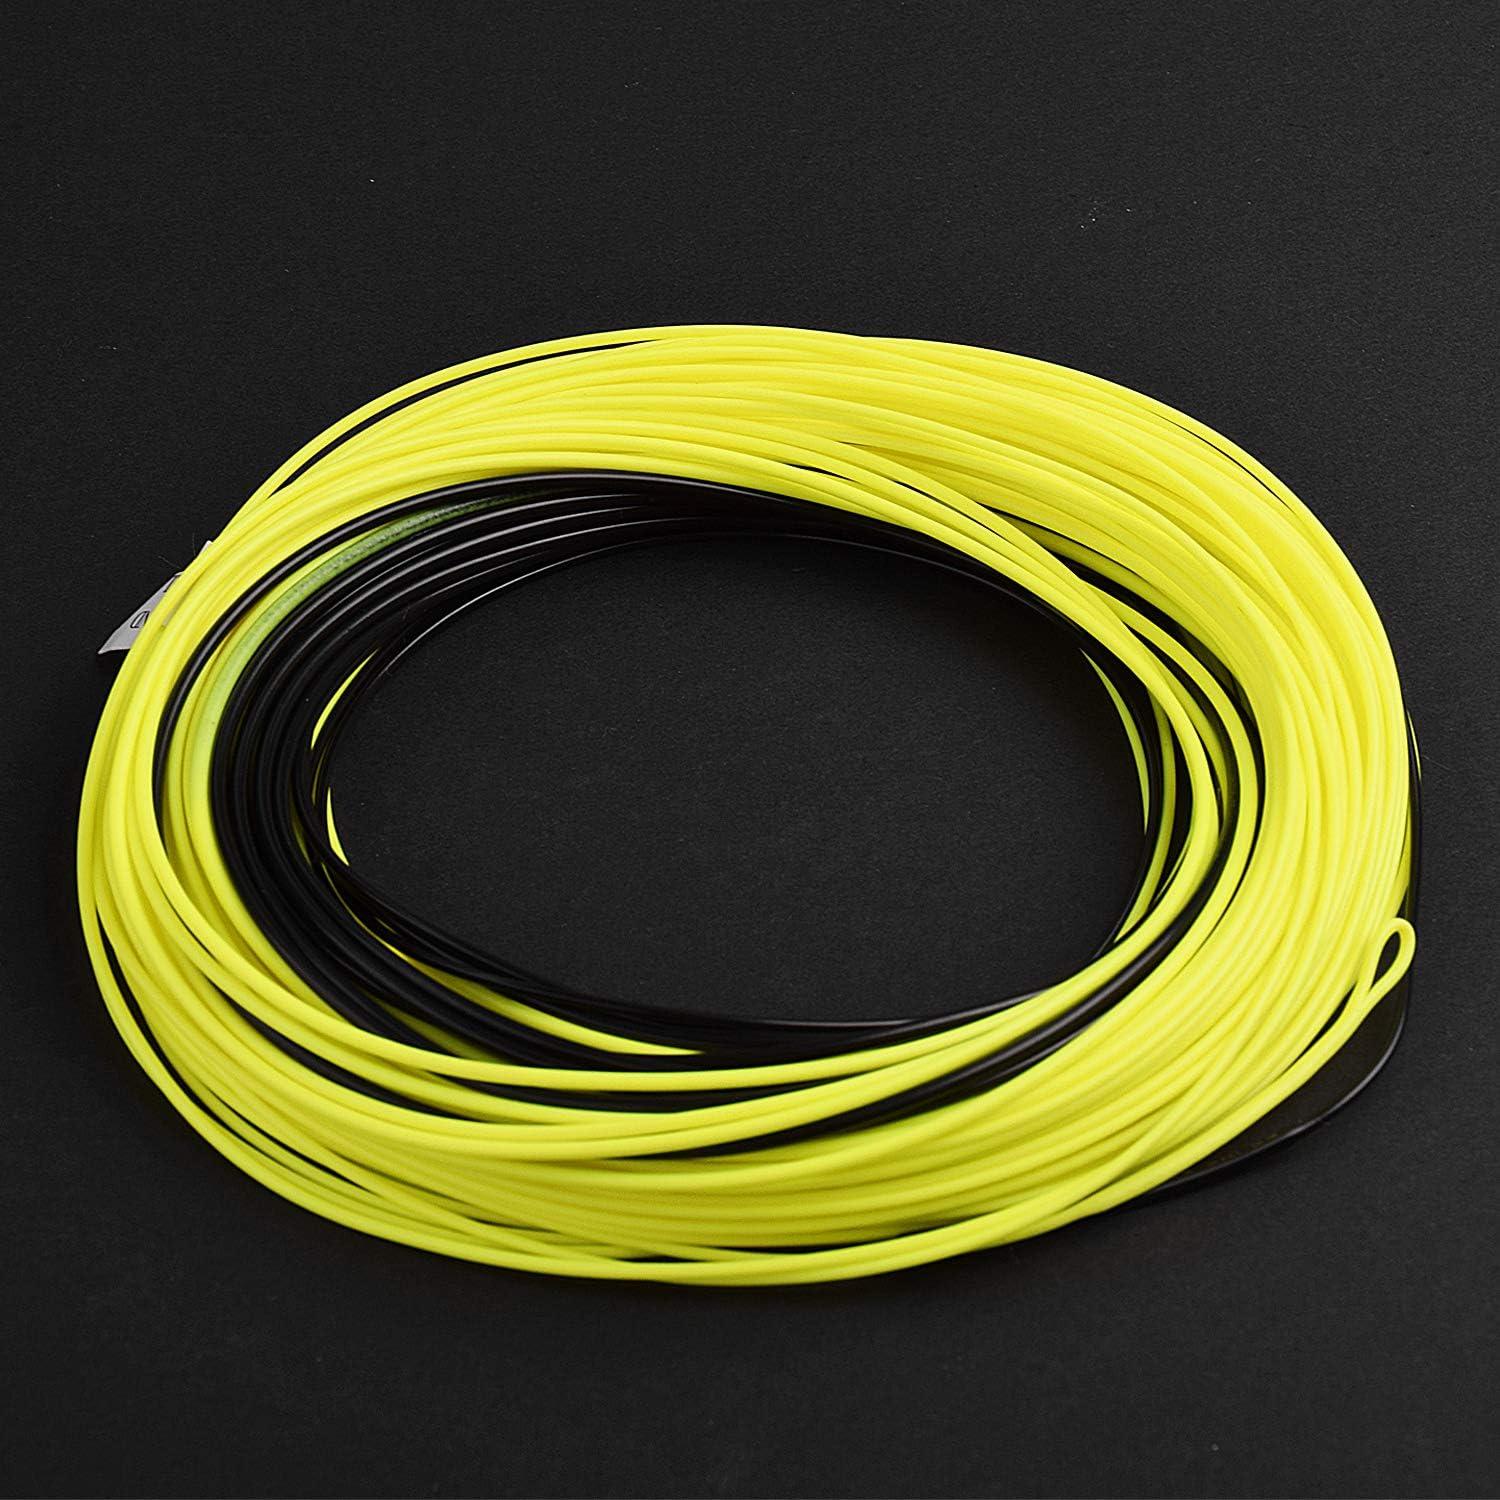 SF Sinking Tip Line Weight Forward Taper Fly Line Fly Fishing Line with Welded  Loop Floating for Freshwater WF 4 5 6 7 8 9 10F/S 100FT IPS3/IPS5 Fluor  Yellow&Black/Freshwater/Sink Tip WF9F/S-100FT-5IPS